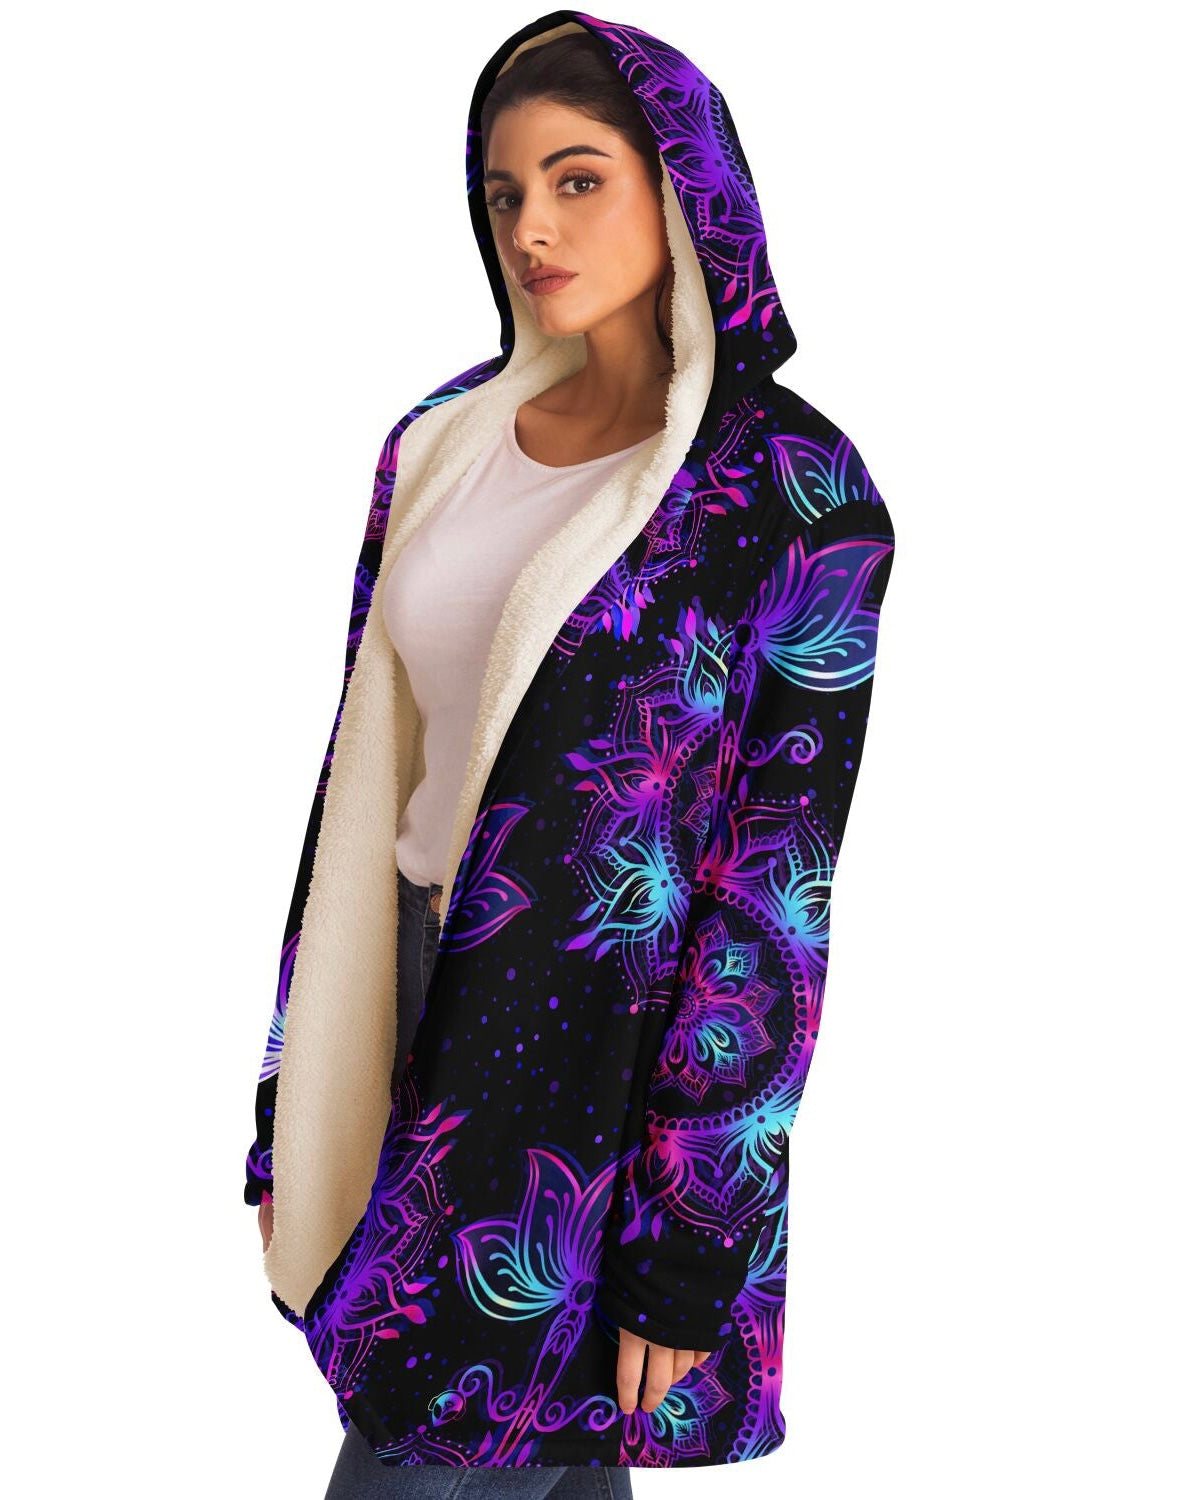 Alternate side-front view of the female model displaying the intricate design of the Starlight Mandala Cloak